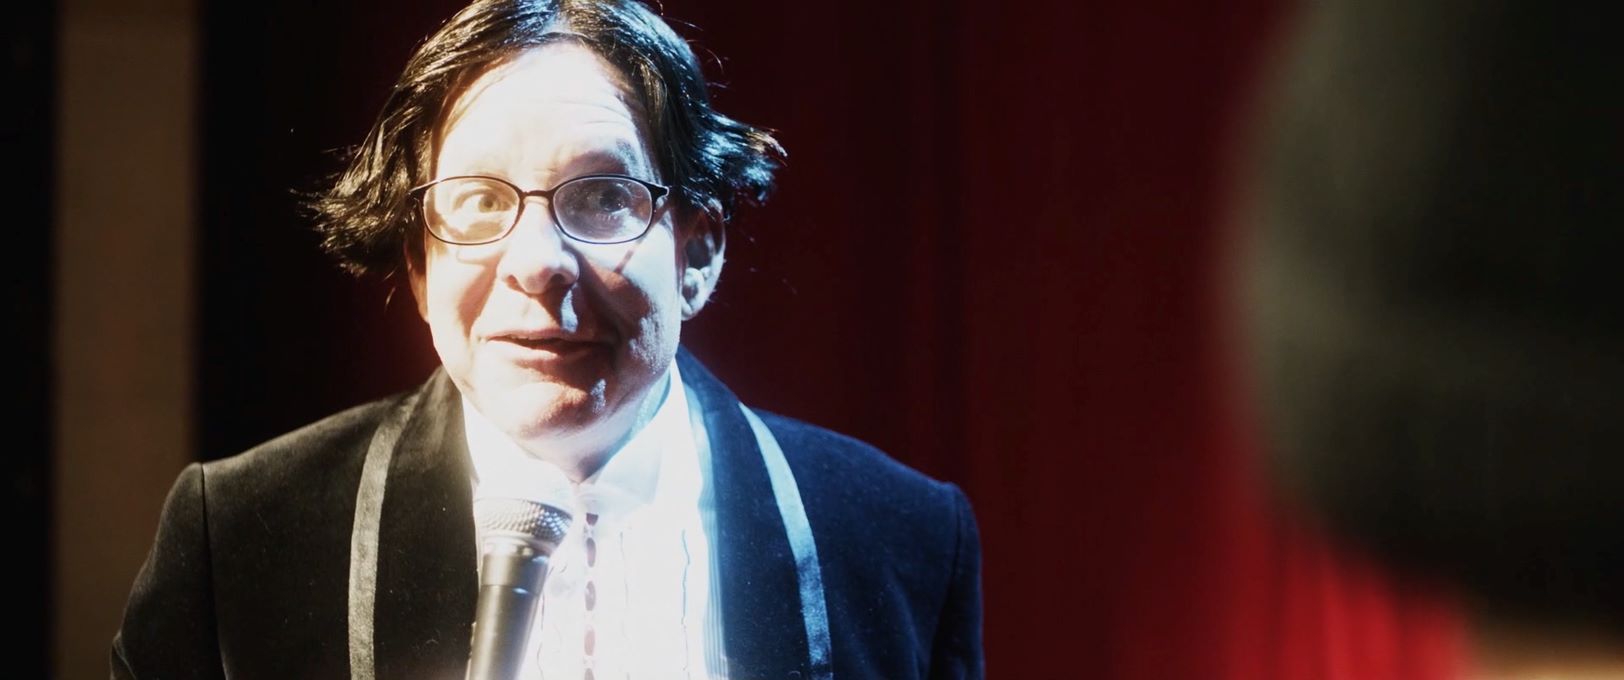 Guttenberg in a bad wig in the spotlight performing